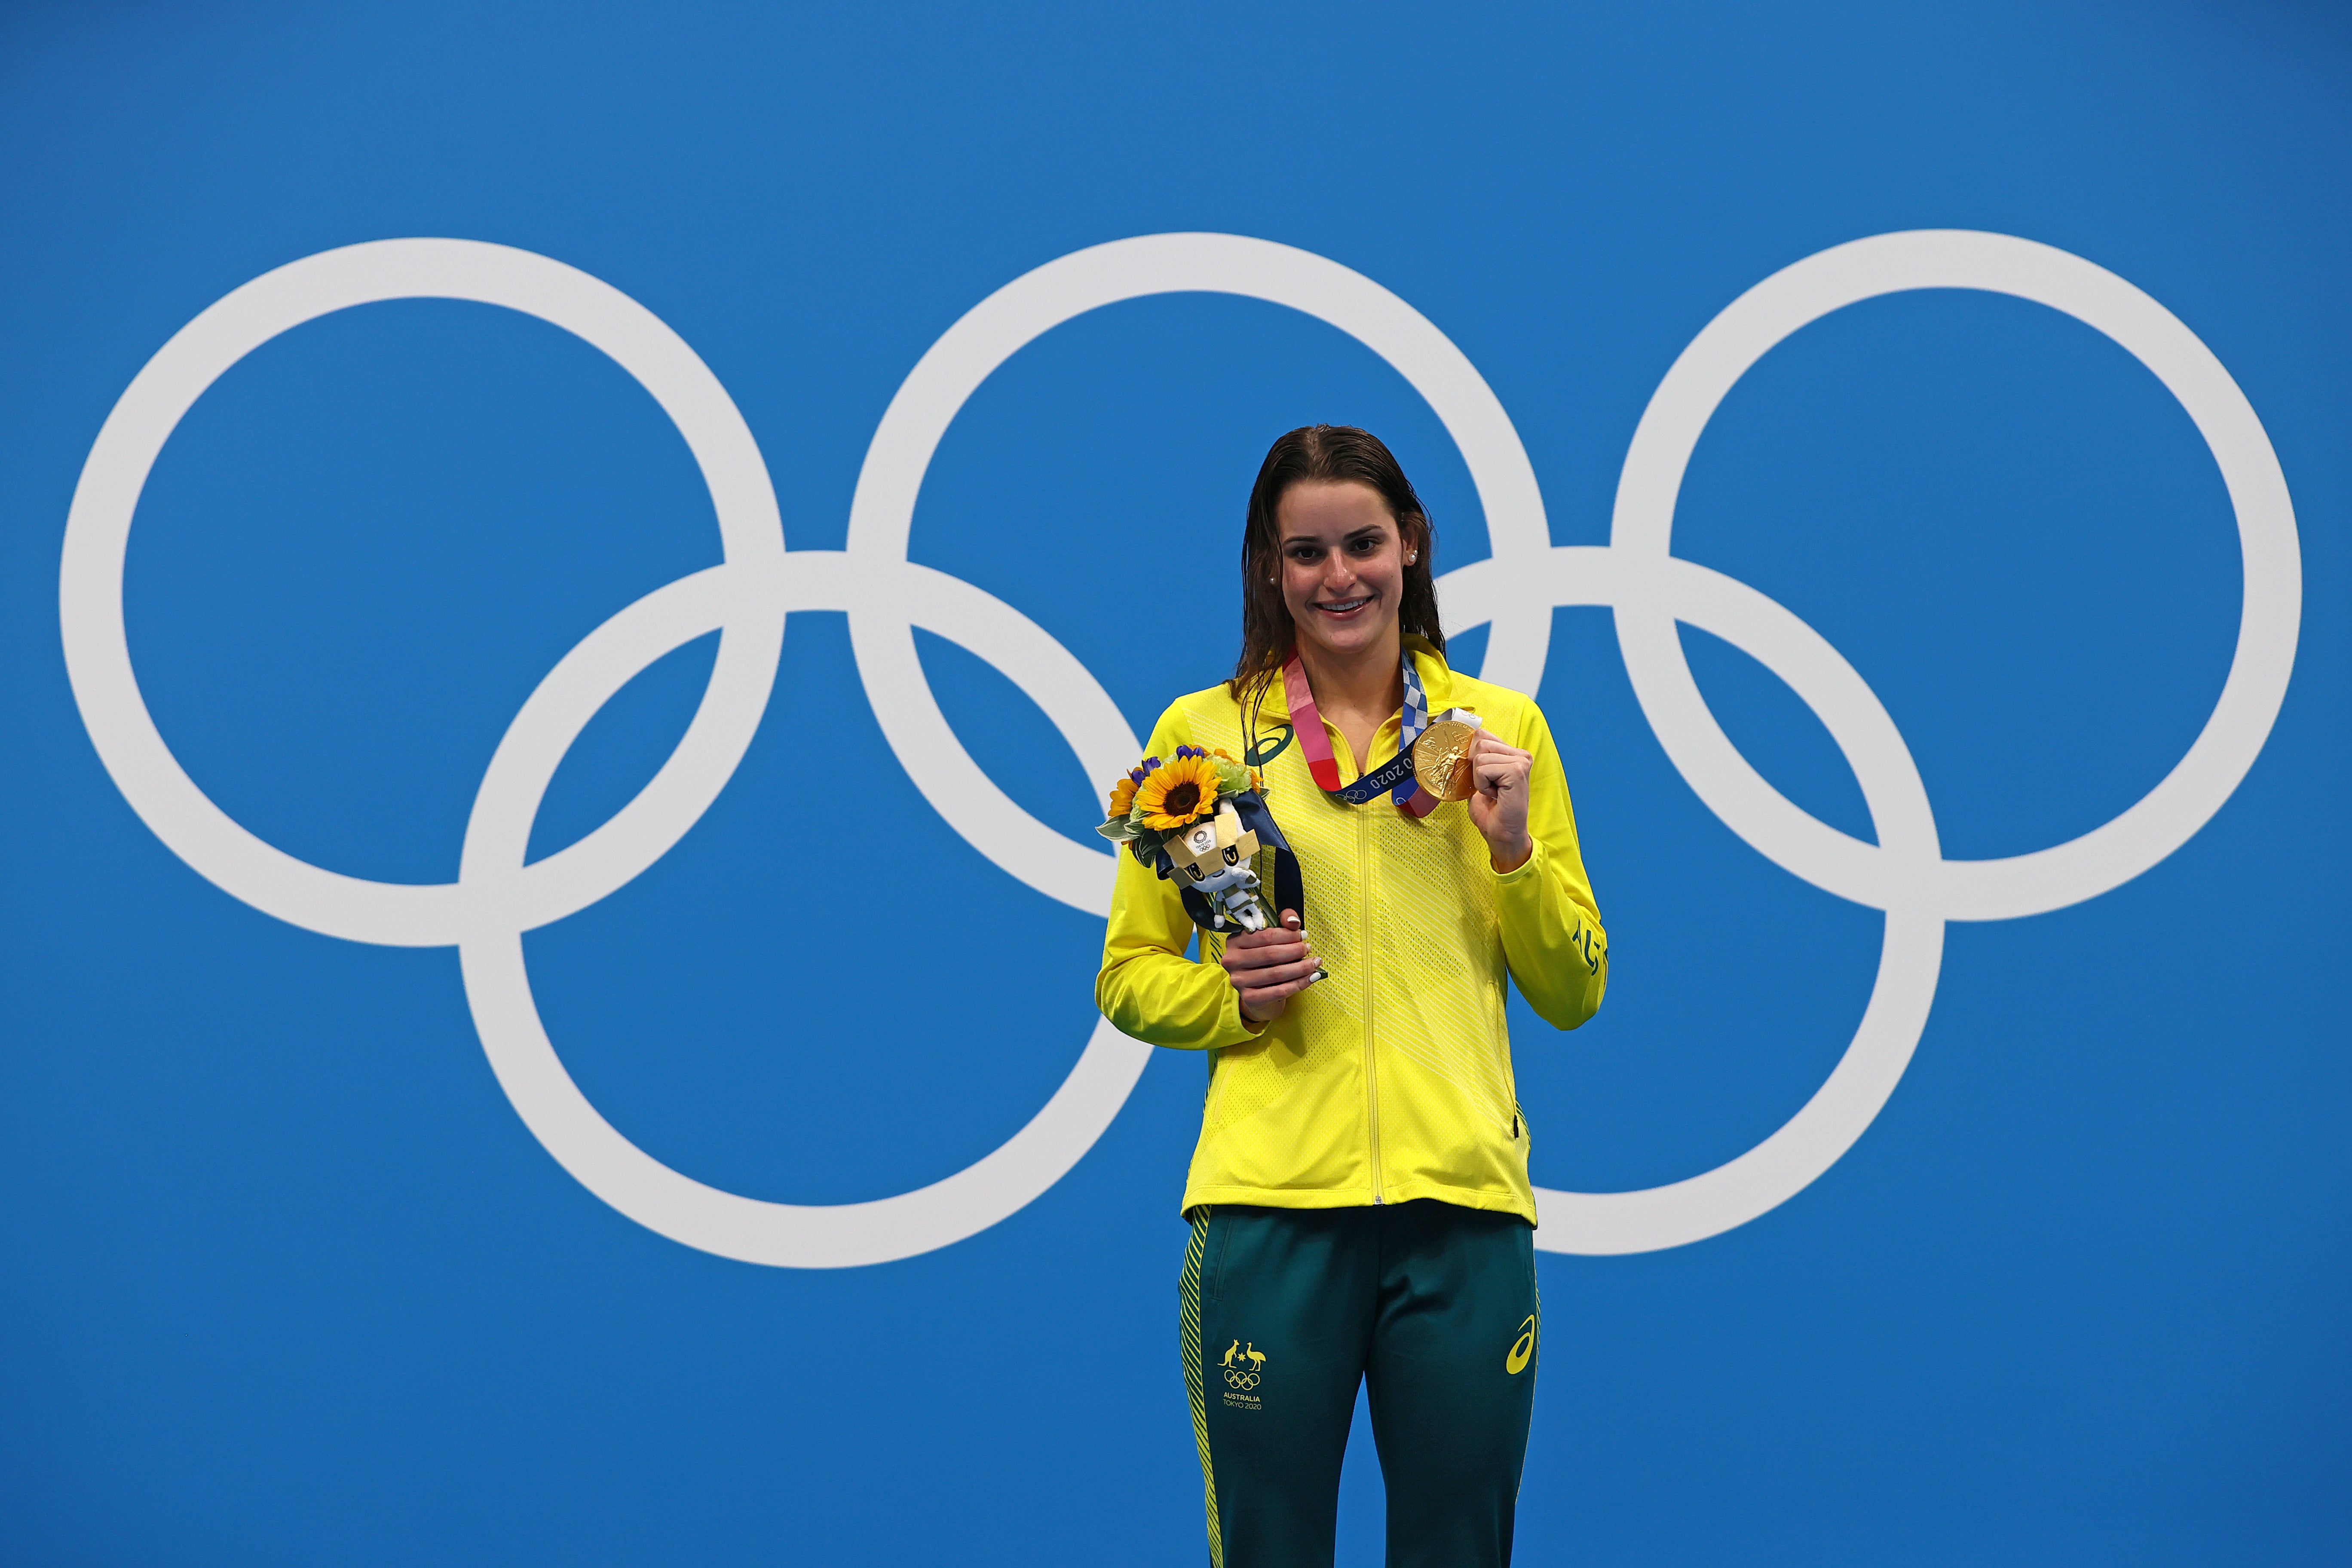 Kaylee McKeown of Team Australia poses with the gold medal after winning the Women's 100m Backstroke Final on day four of the Tokyo 2020 Olympic Games at Tokyo Aquatics Centre on 27 July 2021 in Tokyo, Japan